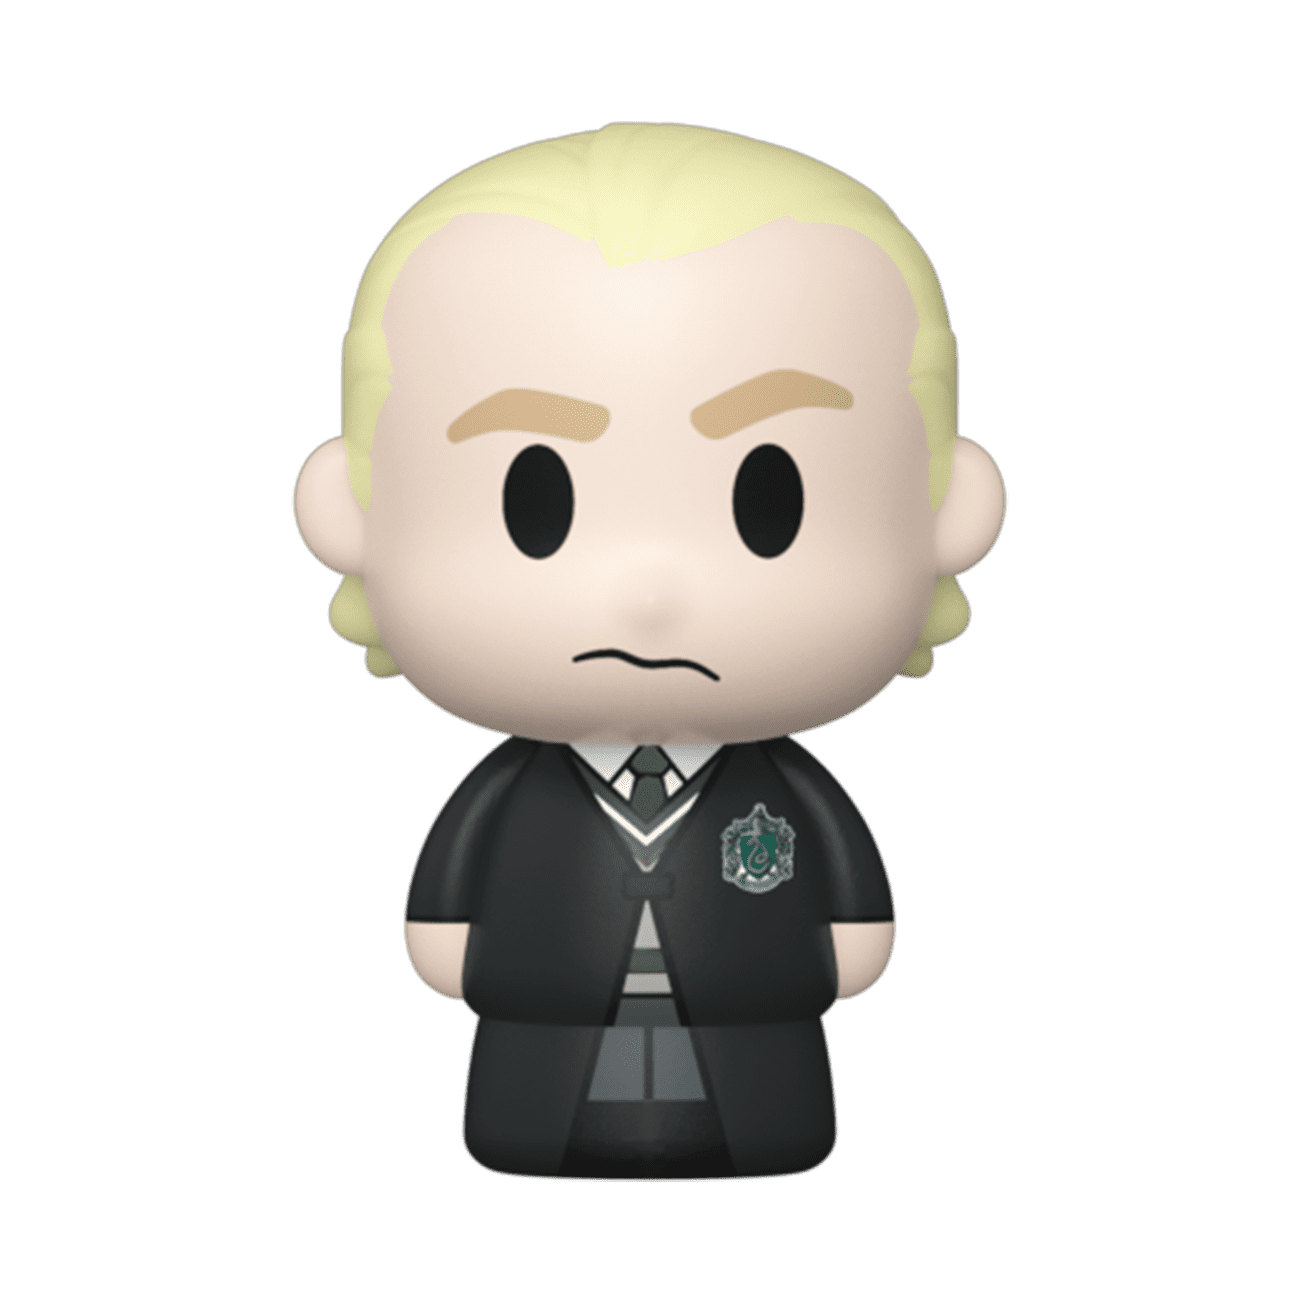 The figurine Funko Pop Draco Malfoy in the video MY ENTIRE COLLECTION OF  FUNKO POP !!